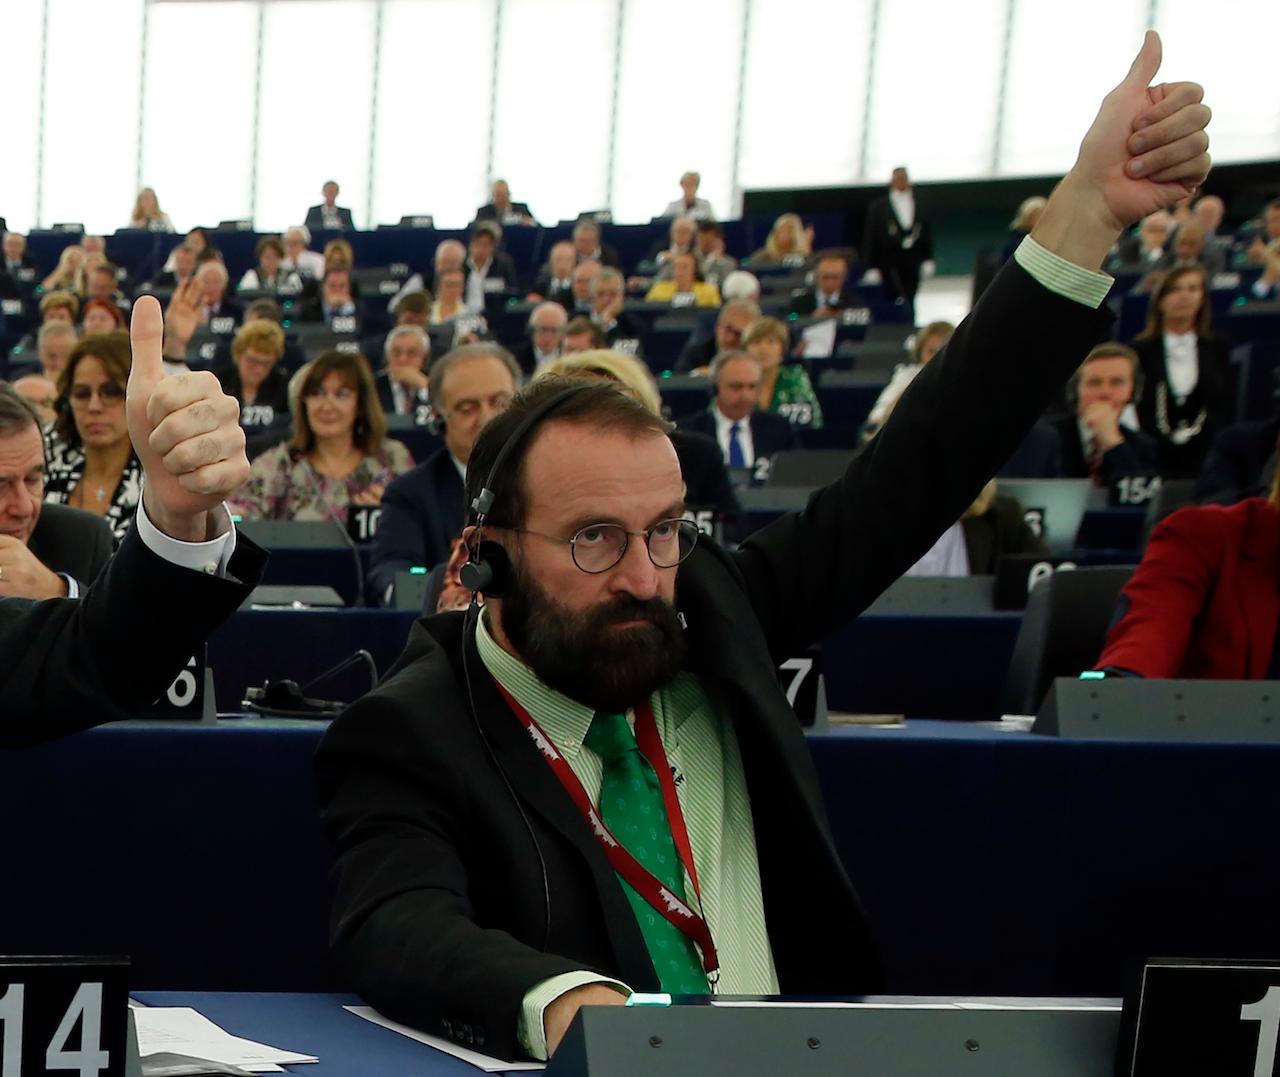 Hungarian lawmaker Jozsef Szajer votes during a session at the European Parliament in Strasbourg, eastern France, in this file picture taken Oct 4, 2016. Photo: AP